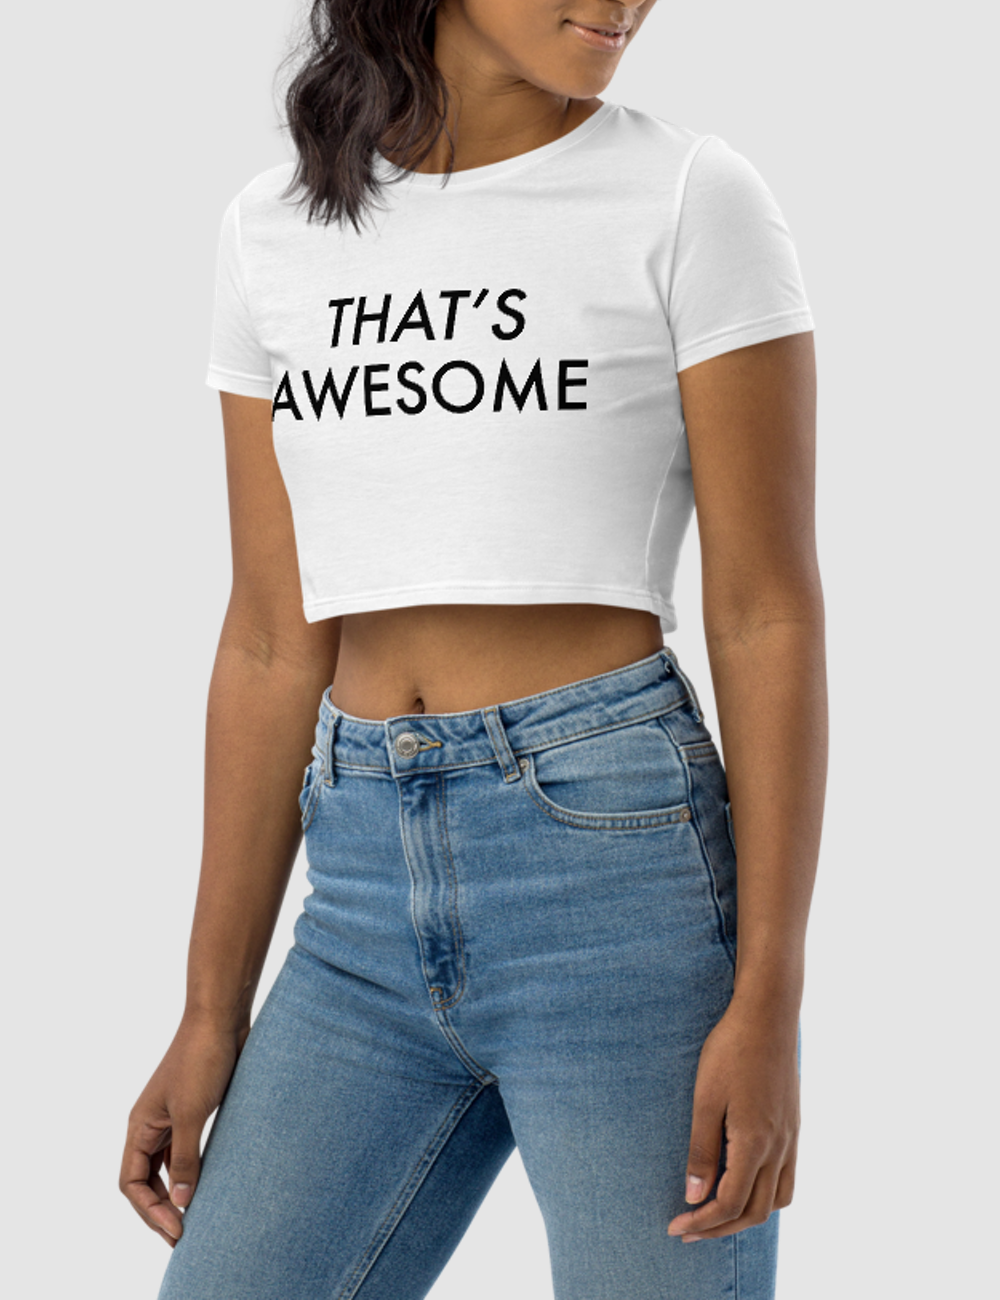 That's Awesome Women's Fitted Crop Top T-Shirt OniTakai